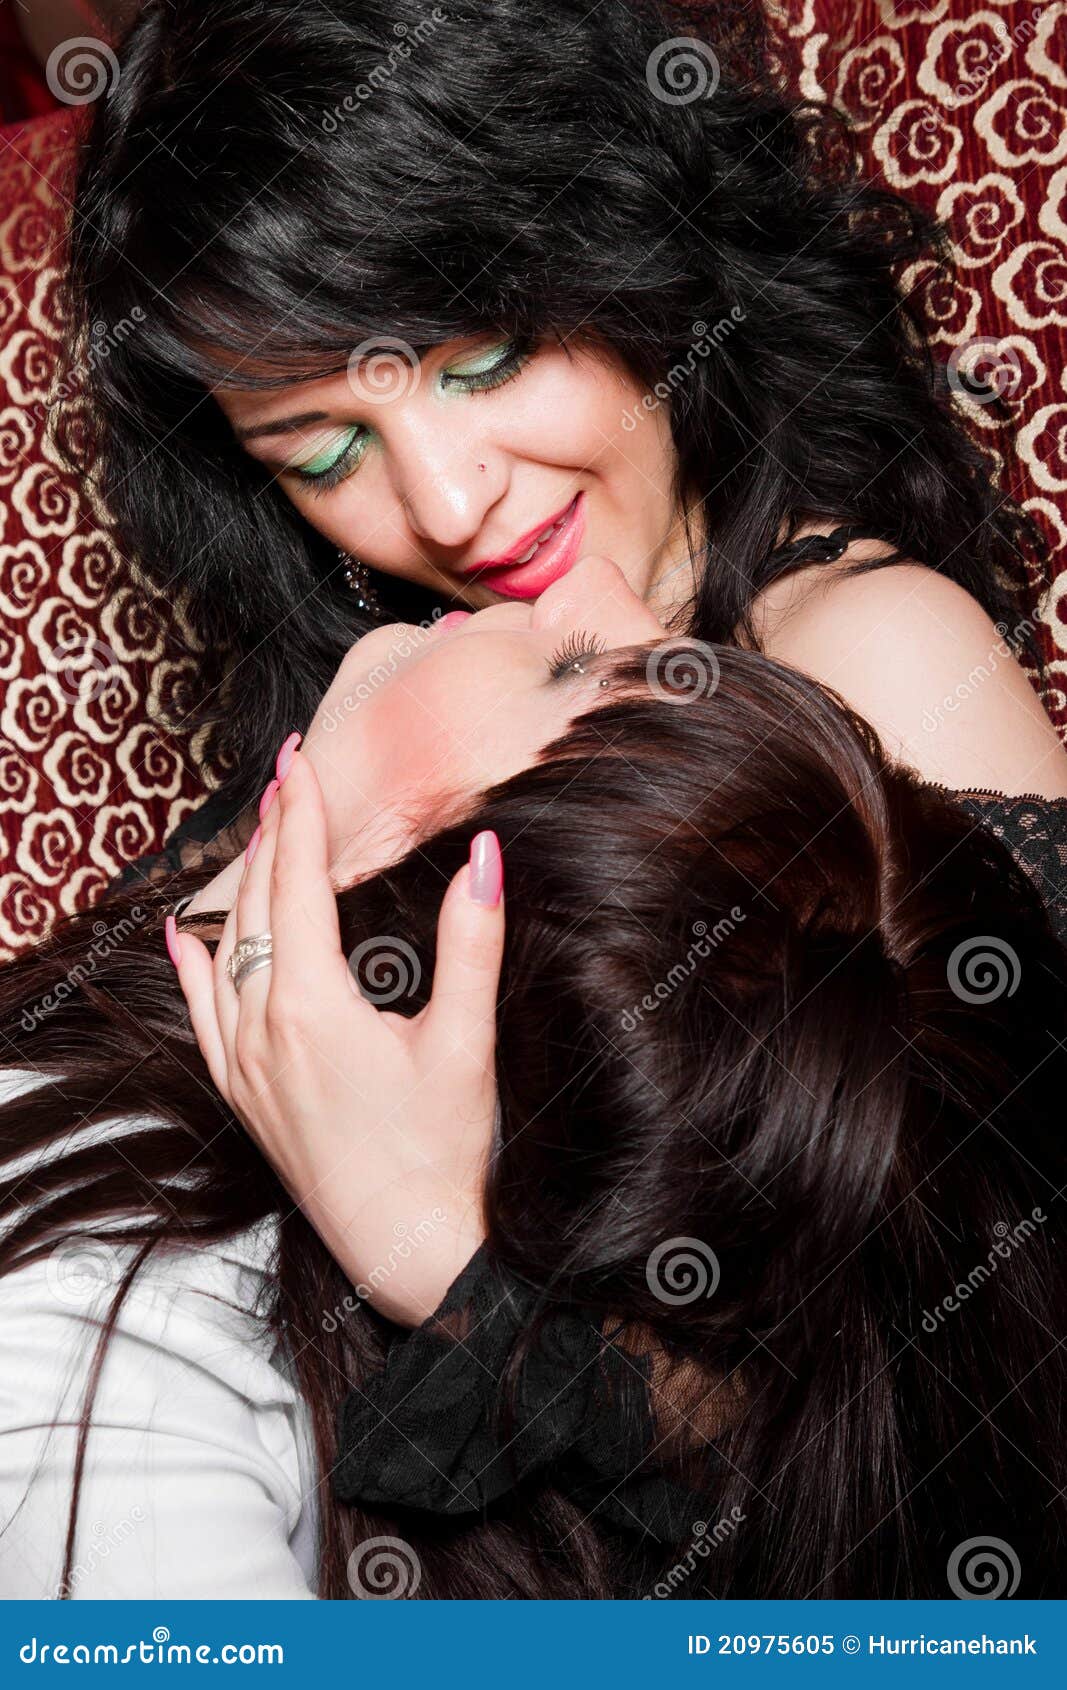 Two Girls Playing Lesbians In Nightclub Stock Image Image Of Girl Adult 20975605